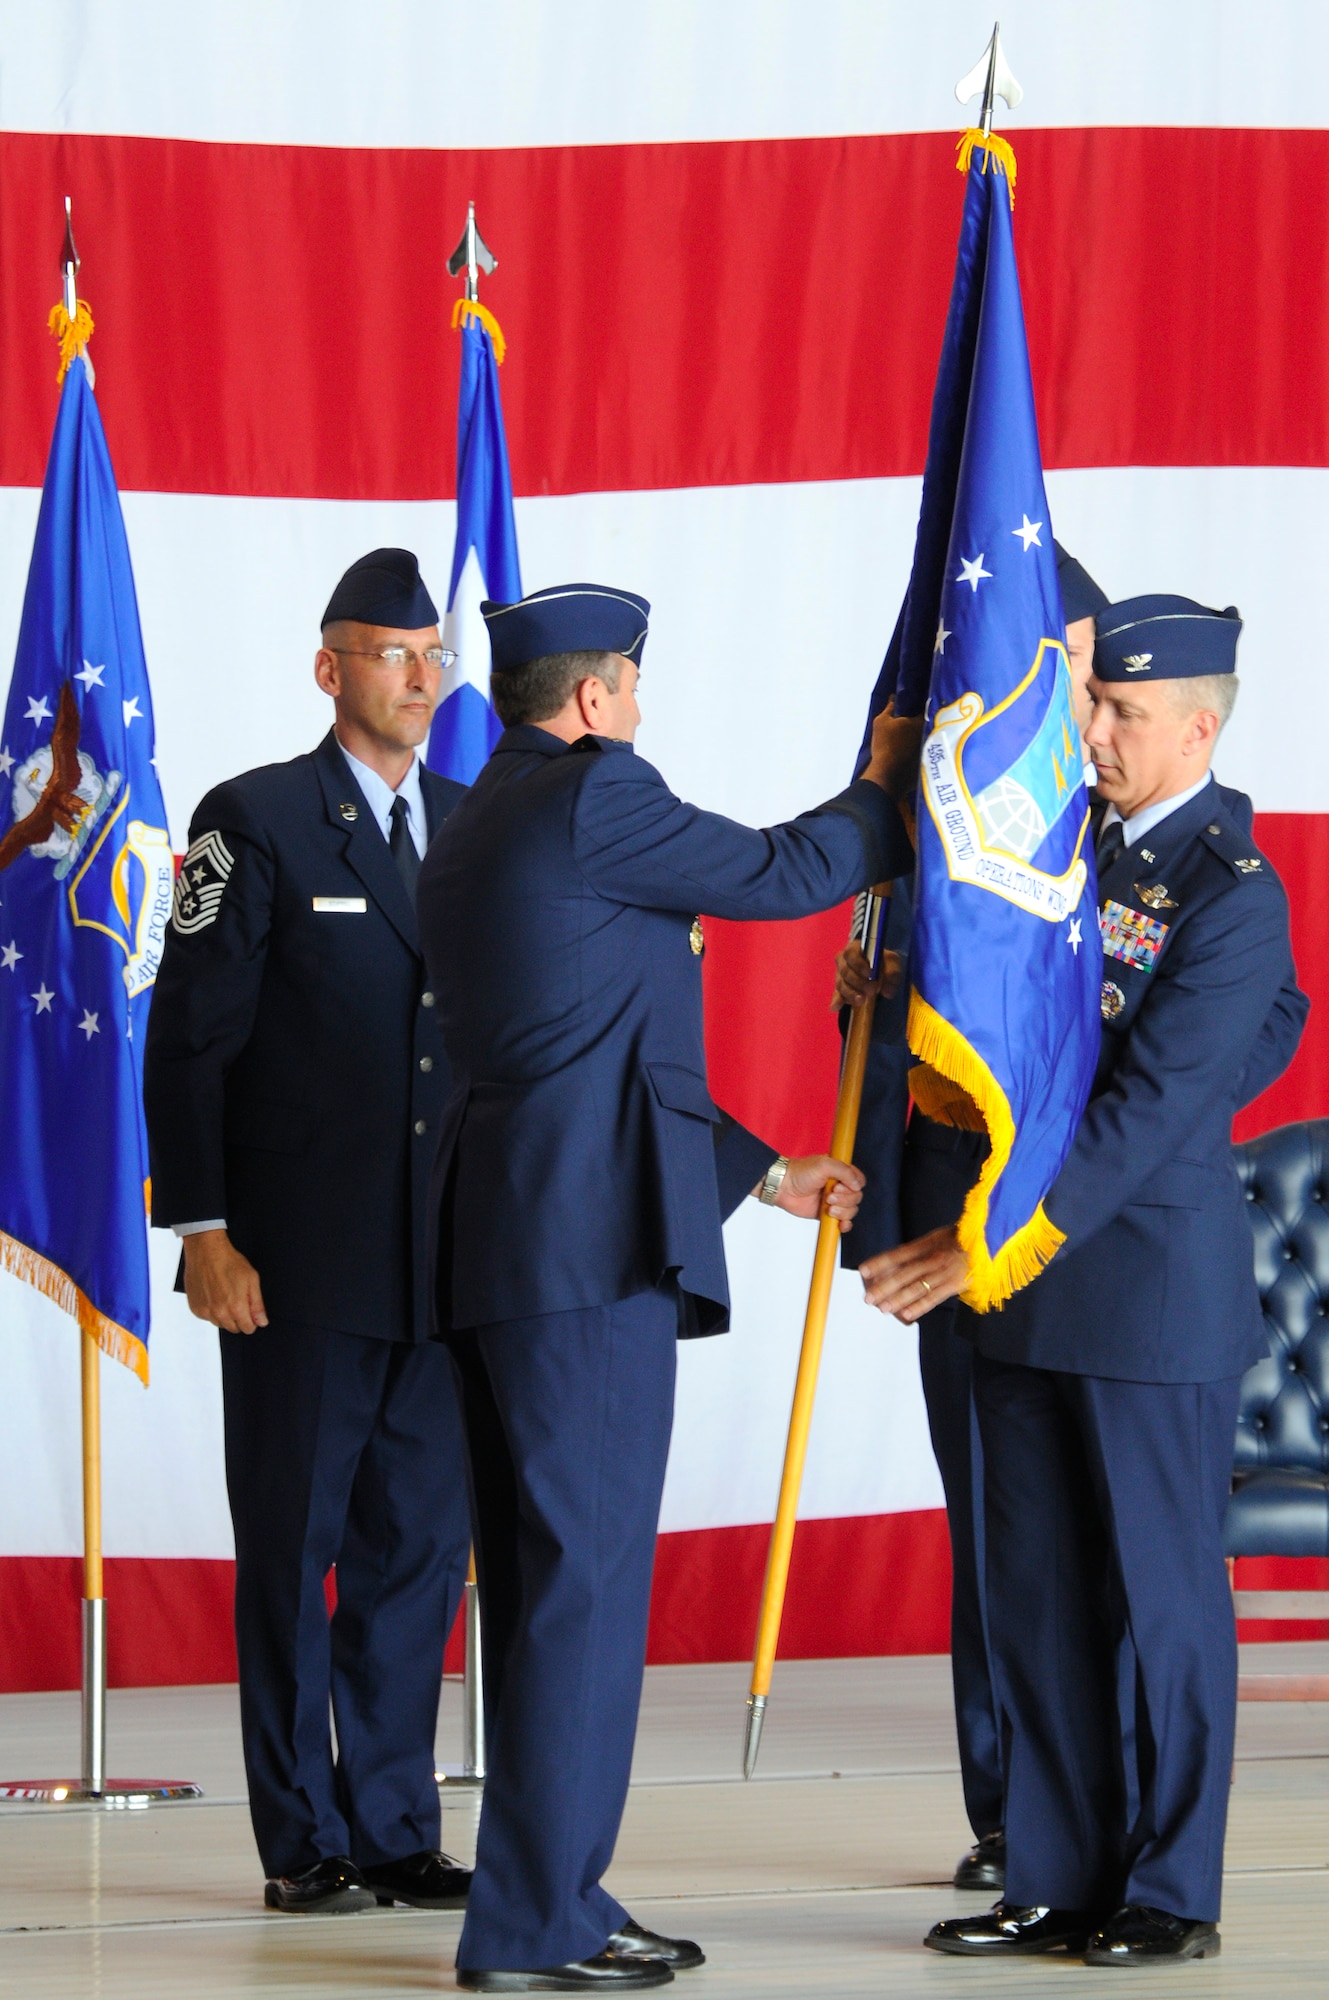 U.S. Air Force Col. Thomas F. Gould, 435th Air Ground Operations Wing commander, receives the guidon from U.S. Air Force Lt. Gen. Philip M. Breedlove, 3rd Air Force commander, during the 435th Air Base Wing redesignation ceremony, Ramstein Air Base, Germany, July 16, 2009. During the ceremony, the 435th ABW was redesignated to the 435th AGOW, the first of its kind in U.S. Air Forces in Europe. (U.S. Air Force photo by Tech. Sgt. Kenneth Bellard)